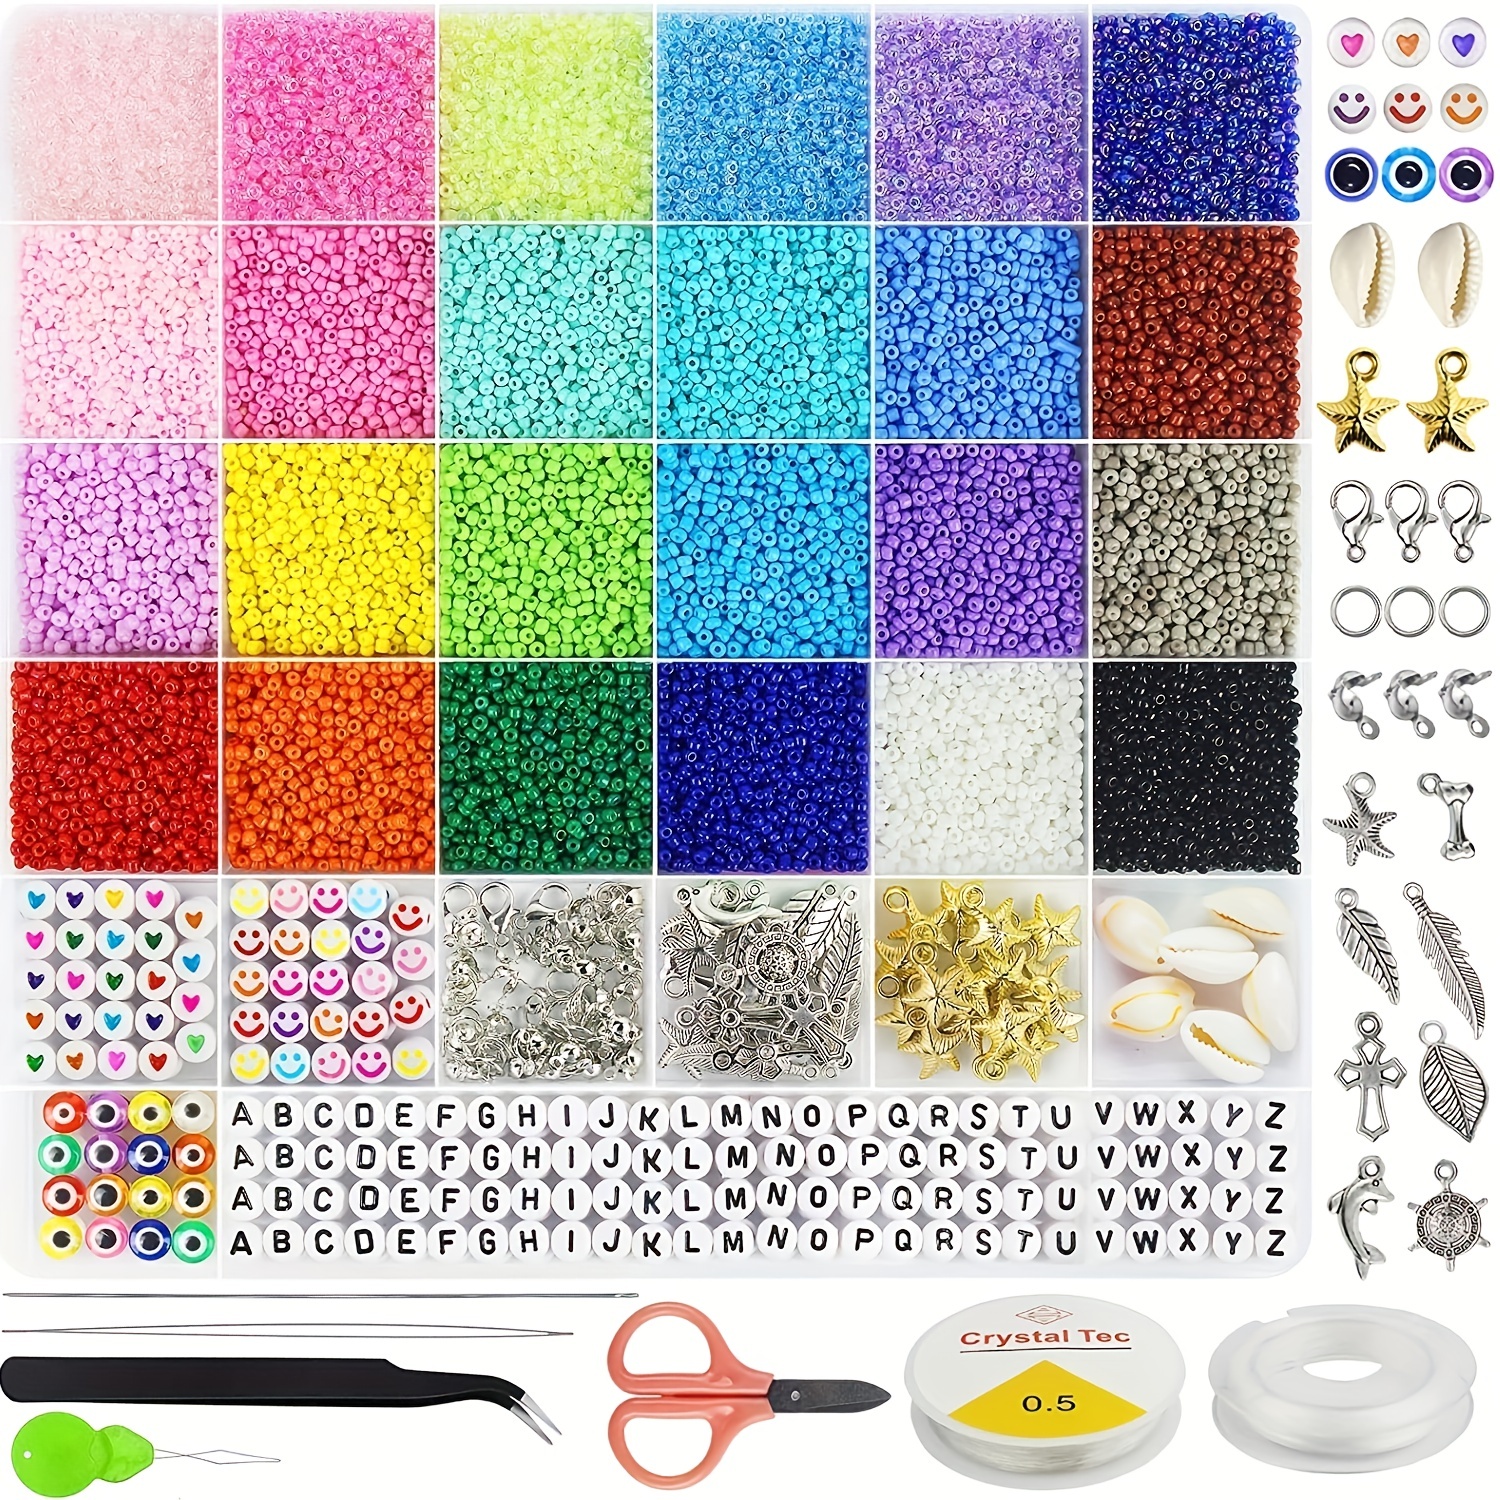 7000Pcs Glass Seed Beads Letter Beads Kit for Bracelets Making with  Colorful Bracelet String 4mm DIY Bracelet Beads Alphabet Beads for Necklace  Earring Bracelet Jewelry Making B price in UAE  Amazon